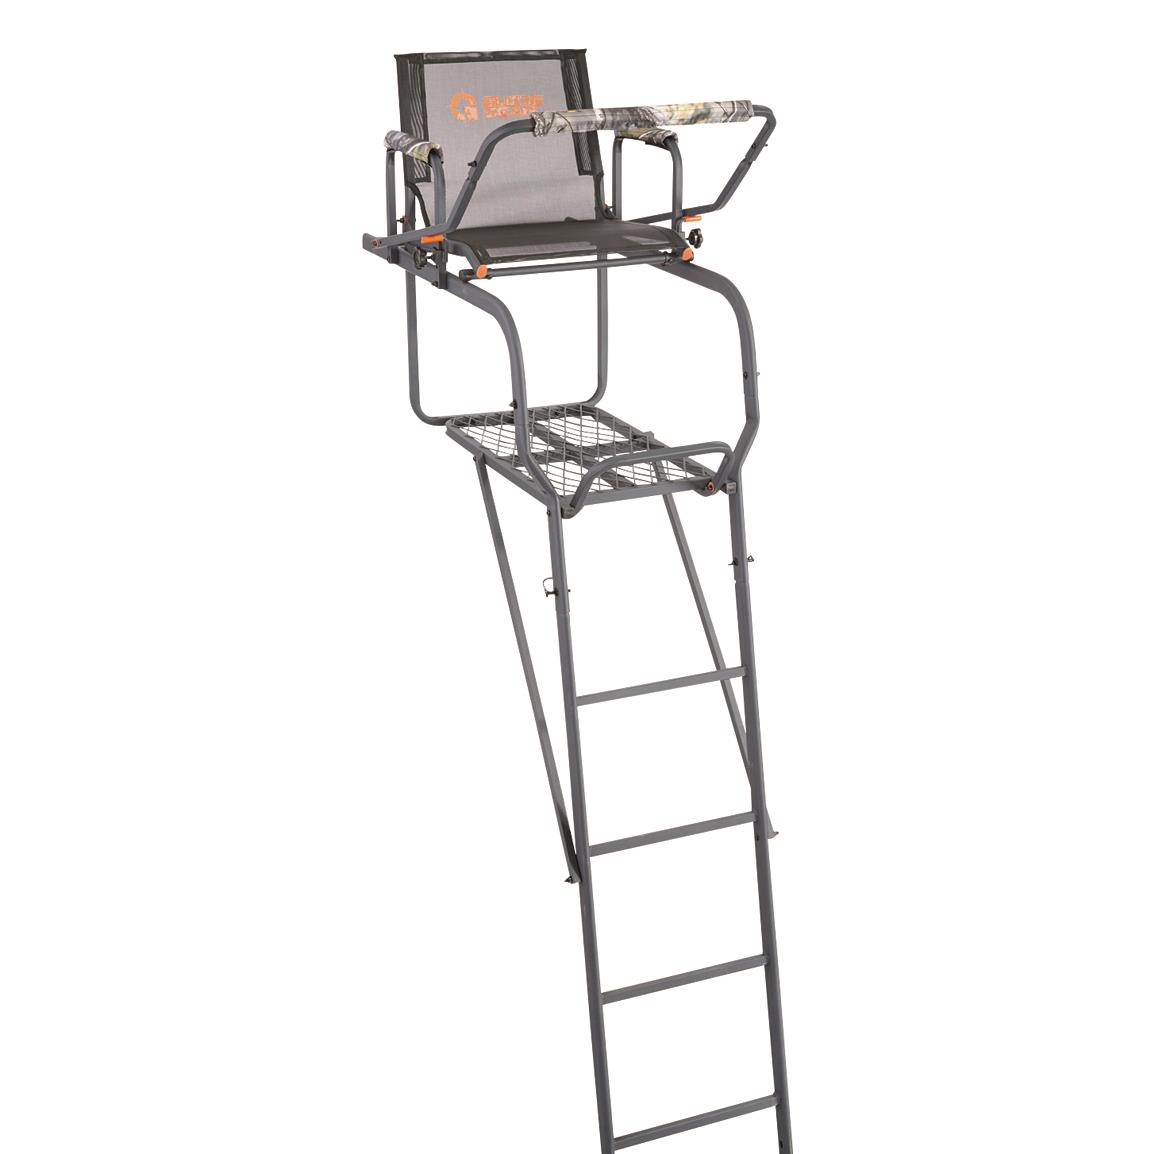 Guide Gear 15.5' Ladder Stand with Mesh Seat